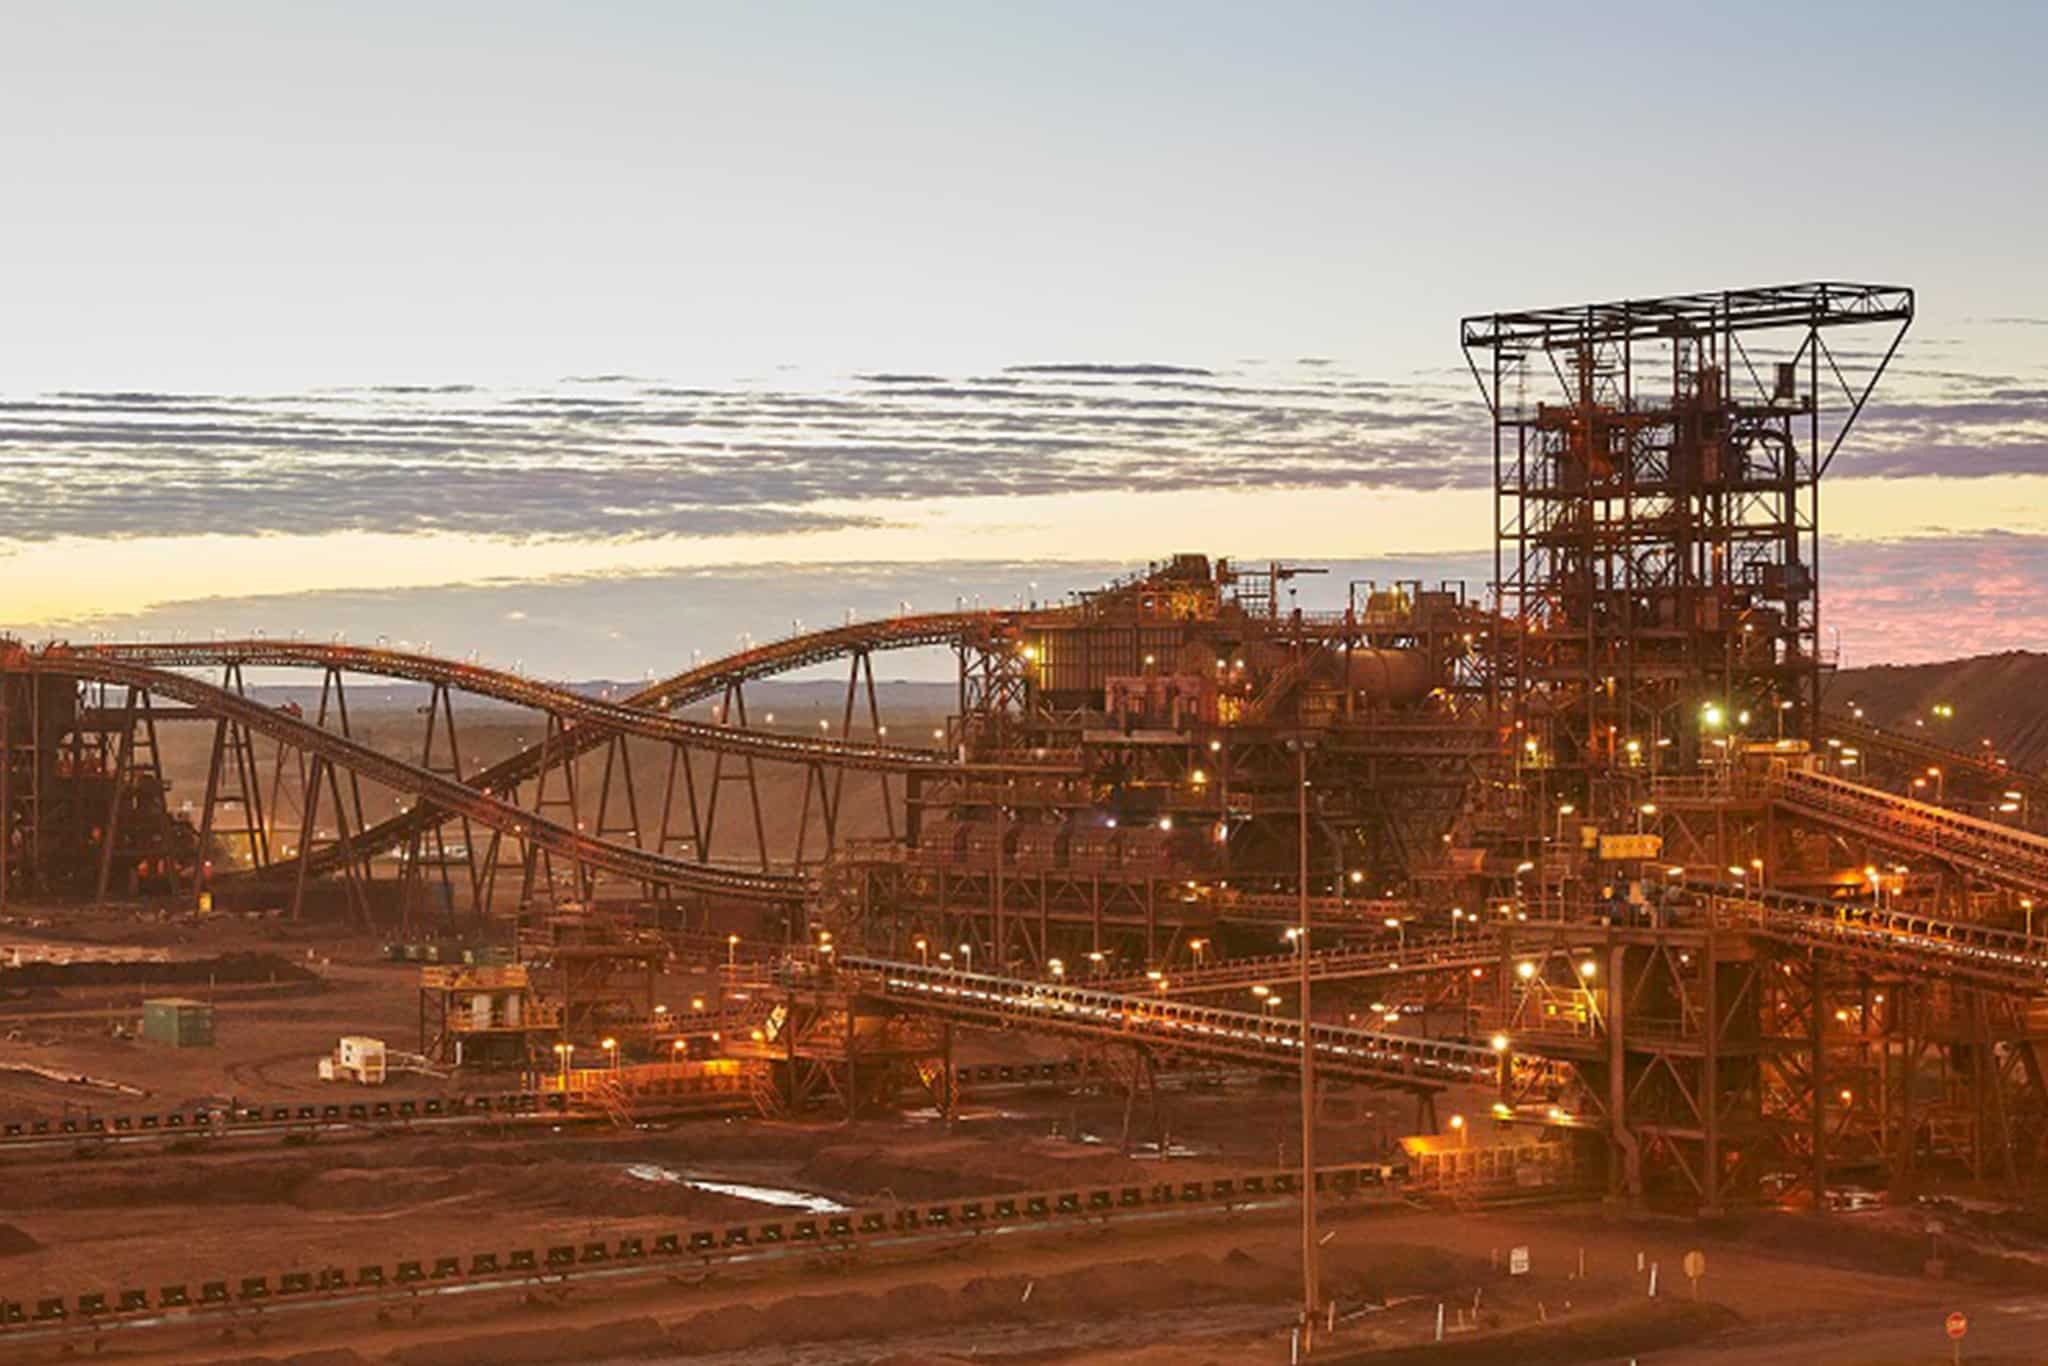 An iron ore mine at sunset with a large crane, surrounded by fire safety equipment.